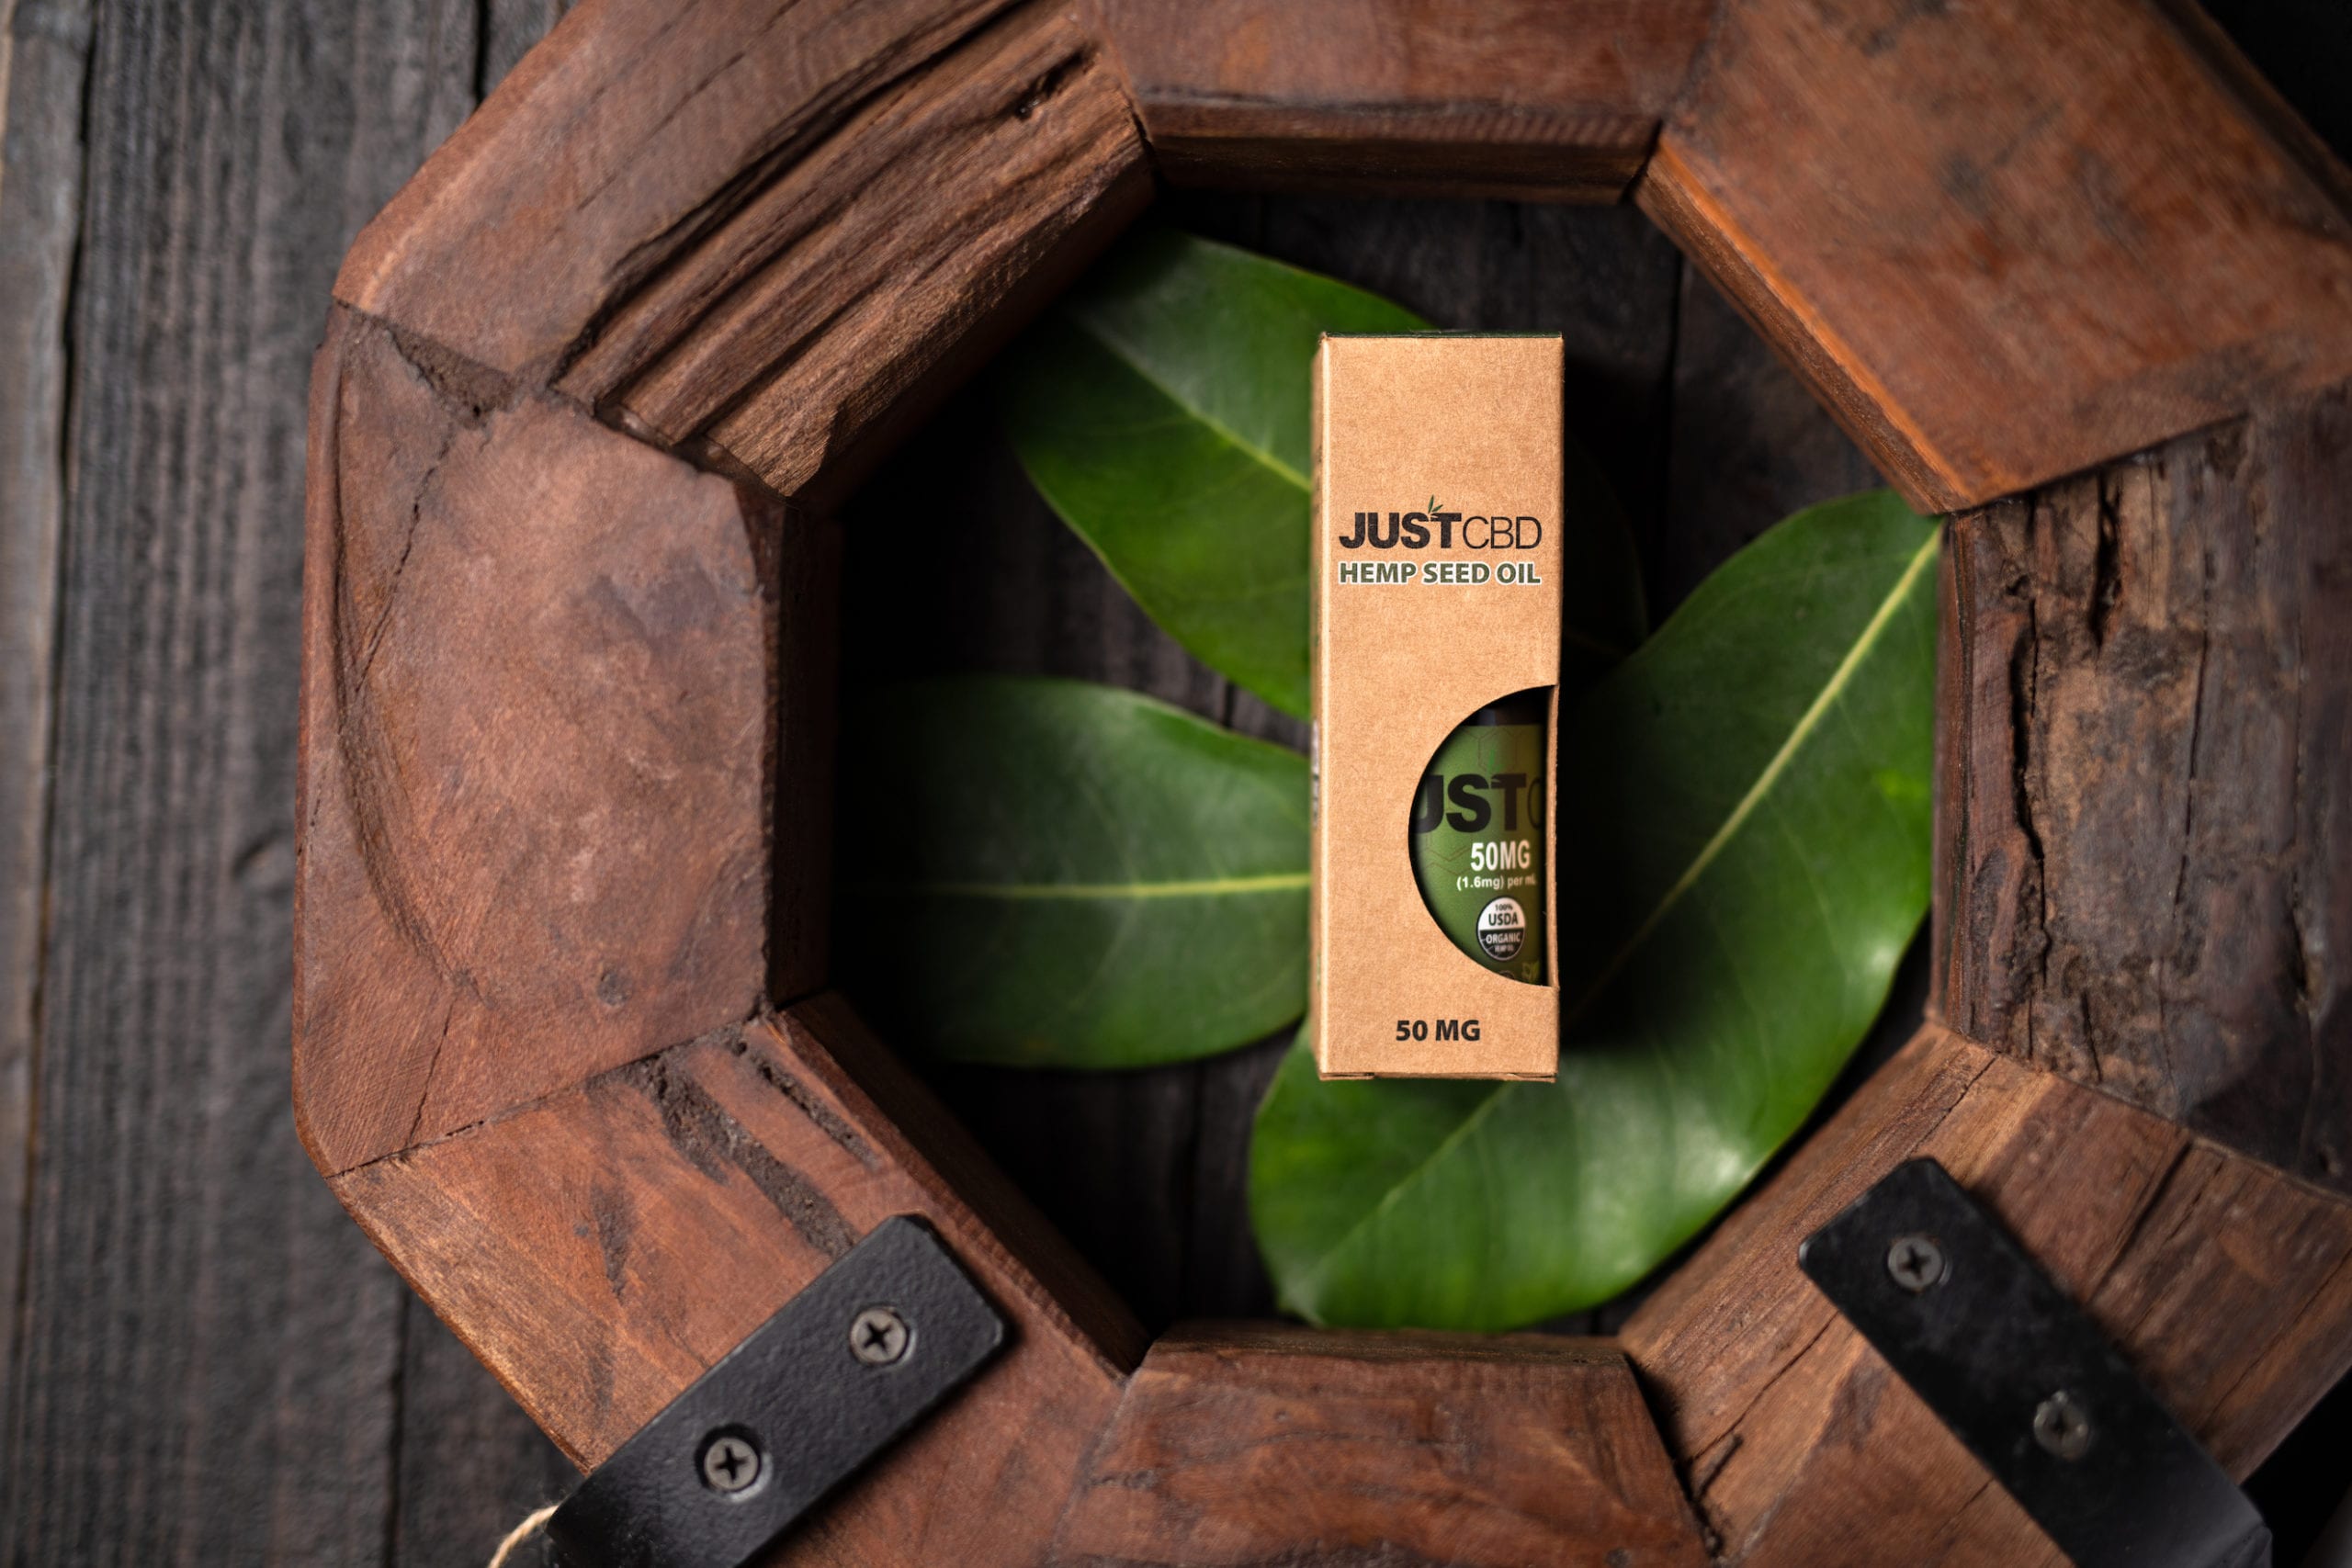 IU C&I Studios Portfolio and Page JustCBD Product Photography and Just CBD Products JUSTCBD Hemp Seed Oil package on display on green plant leaves surrounded by wood blocks